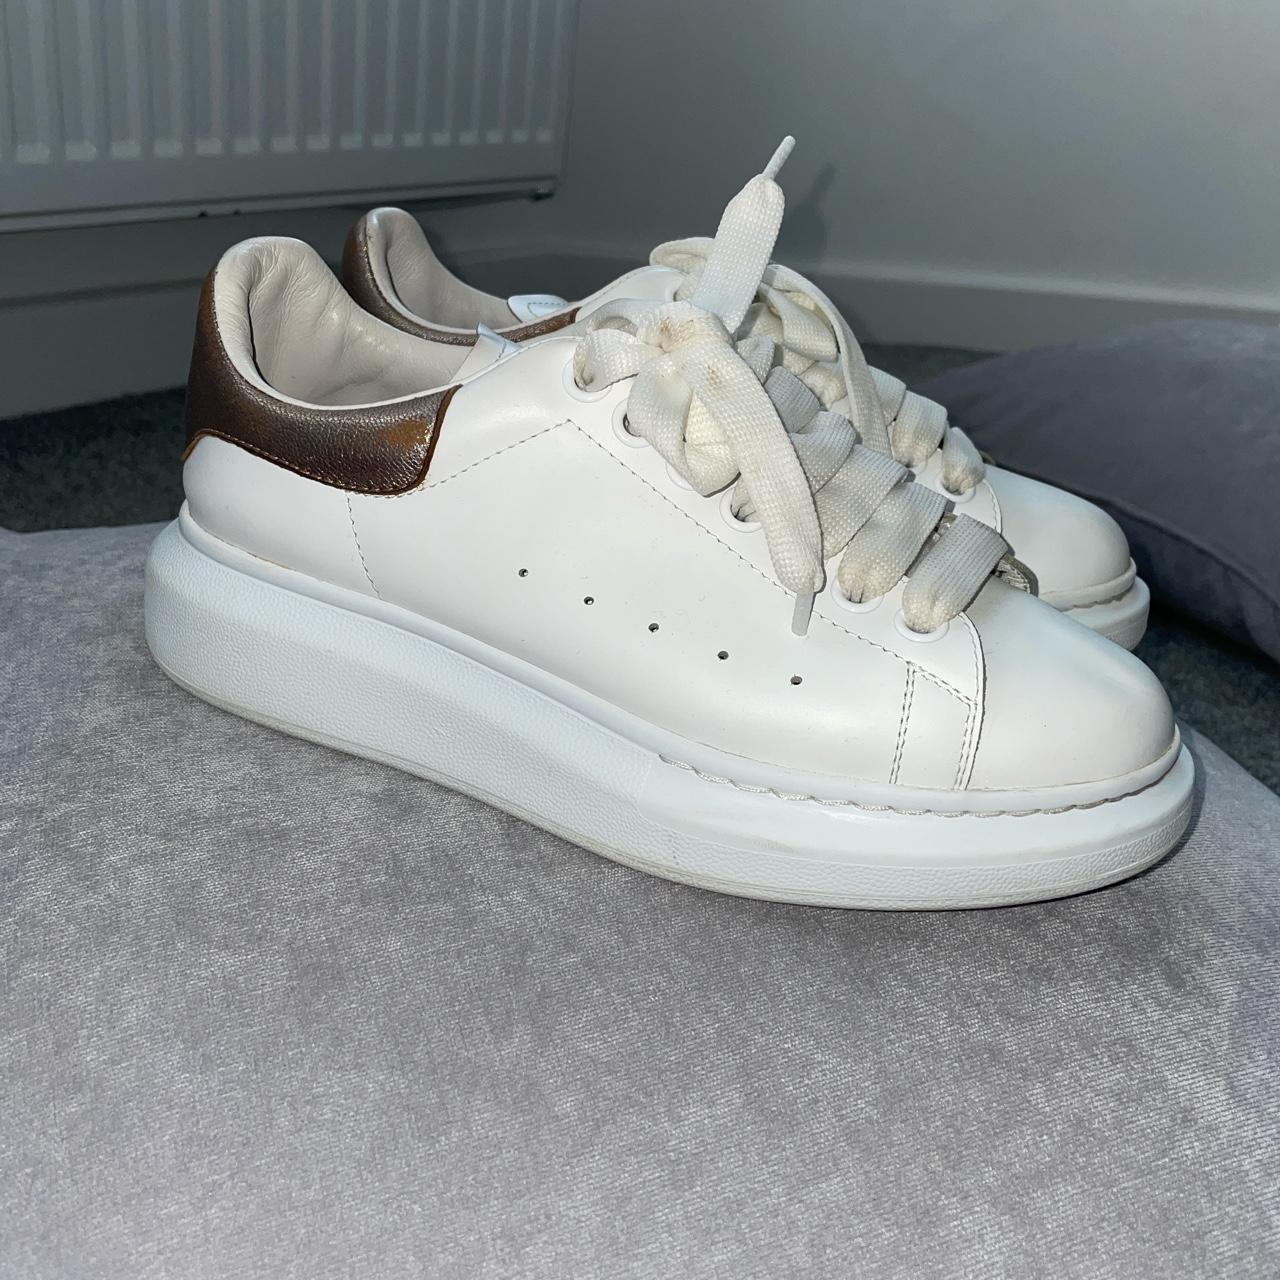 Genuine Rose gold And white Alexander Mcqueens size... - Depop